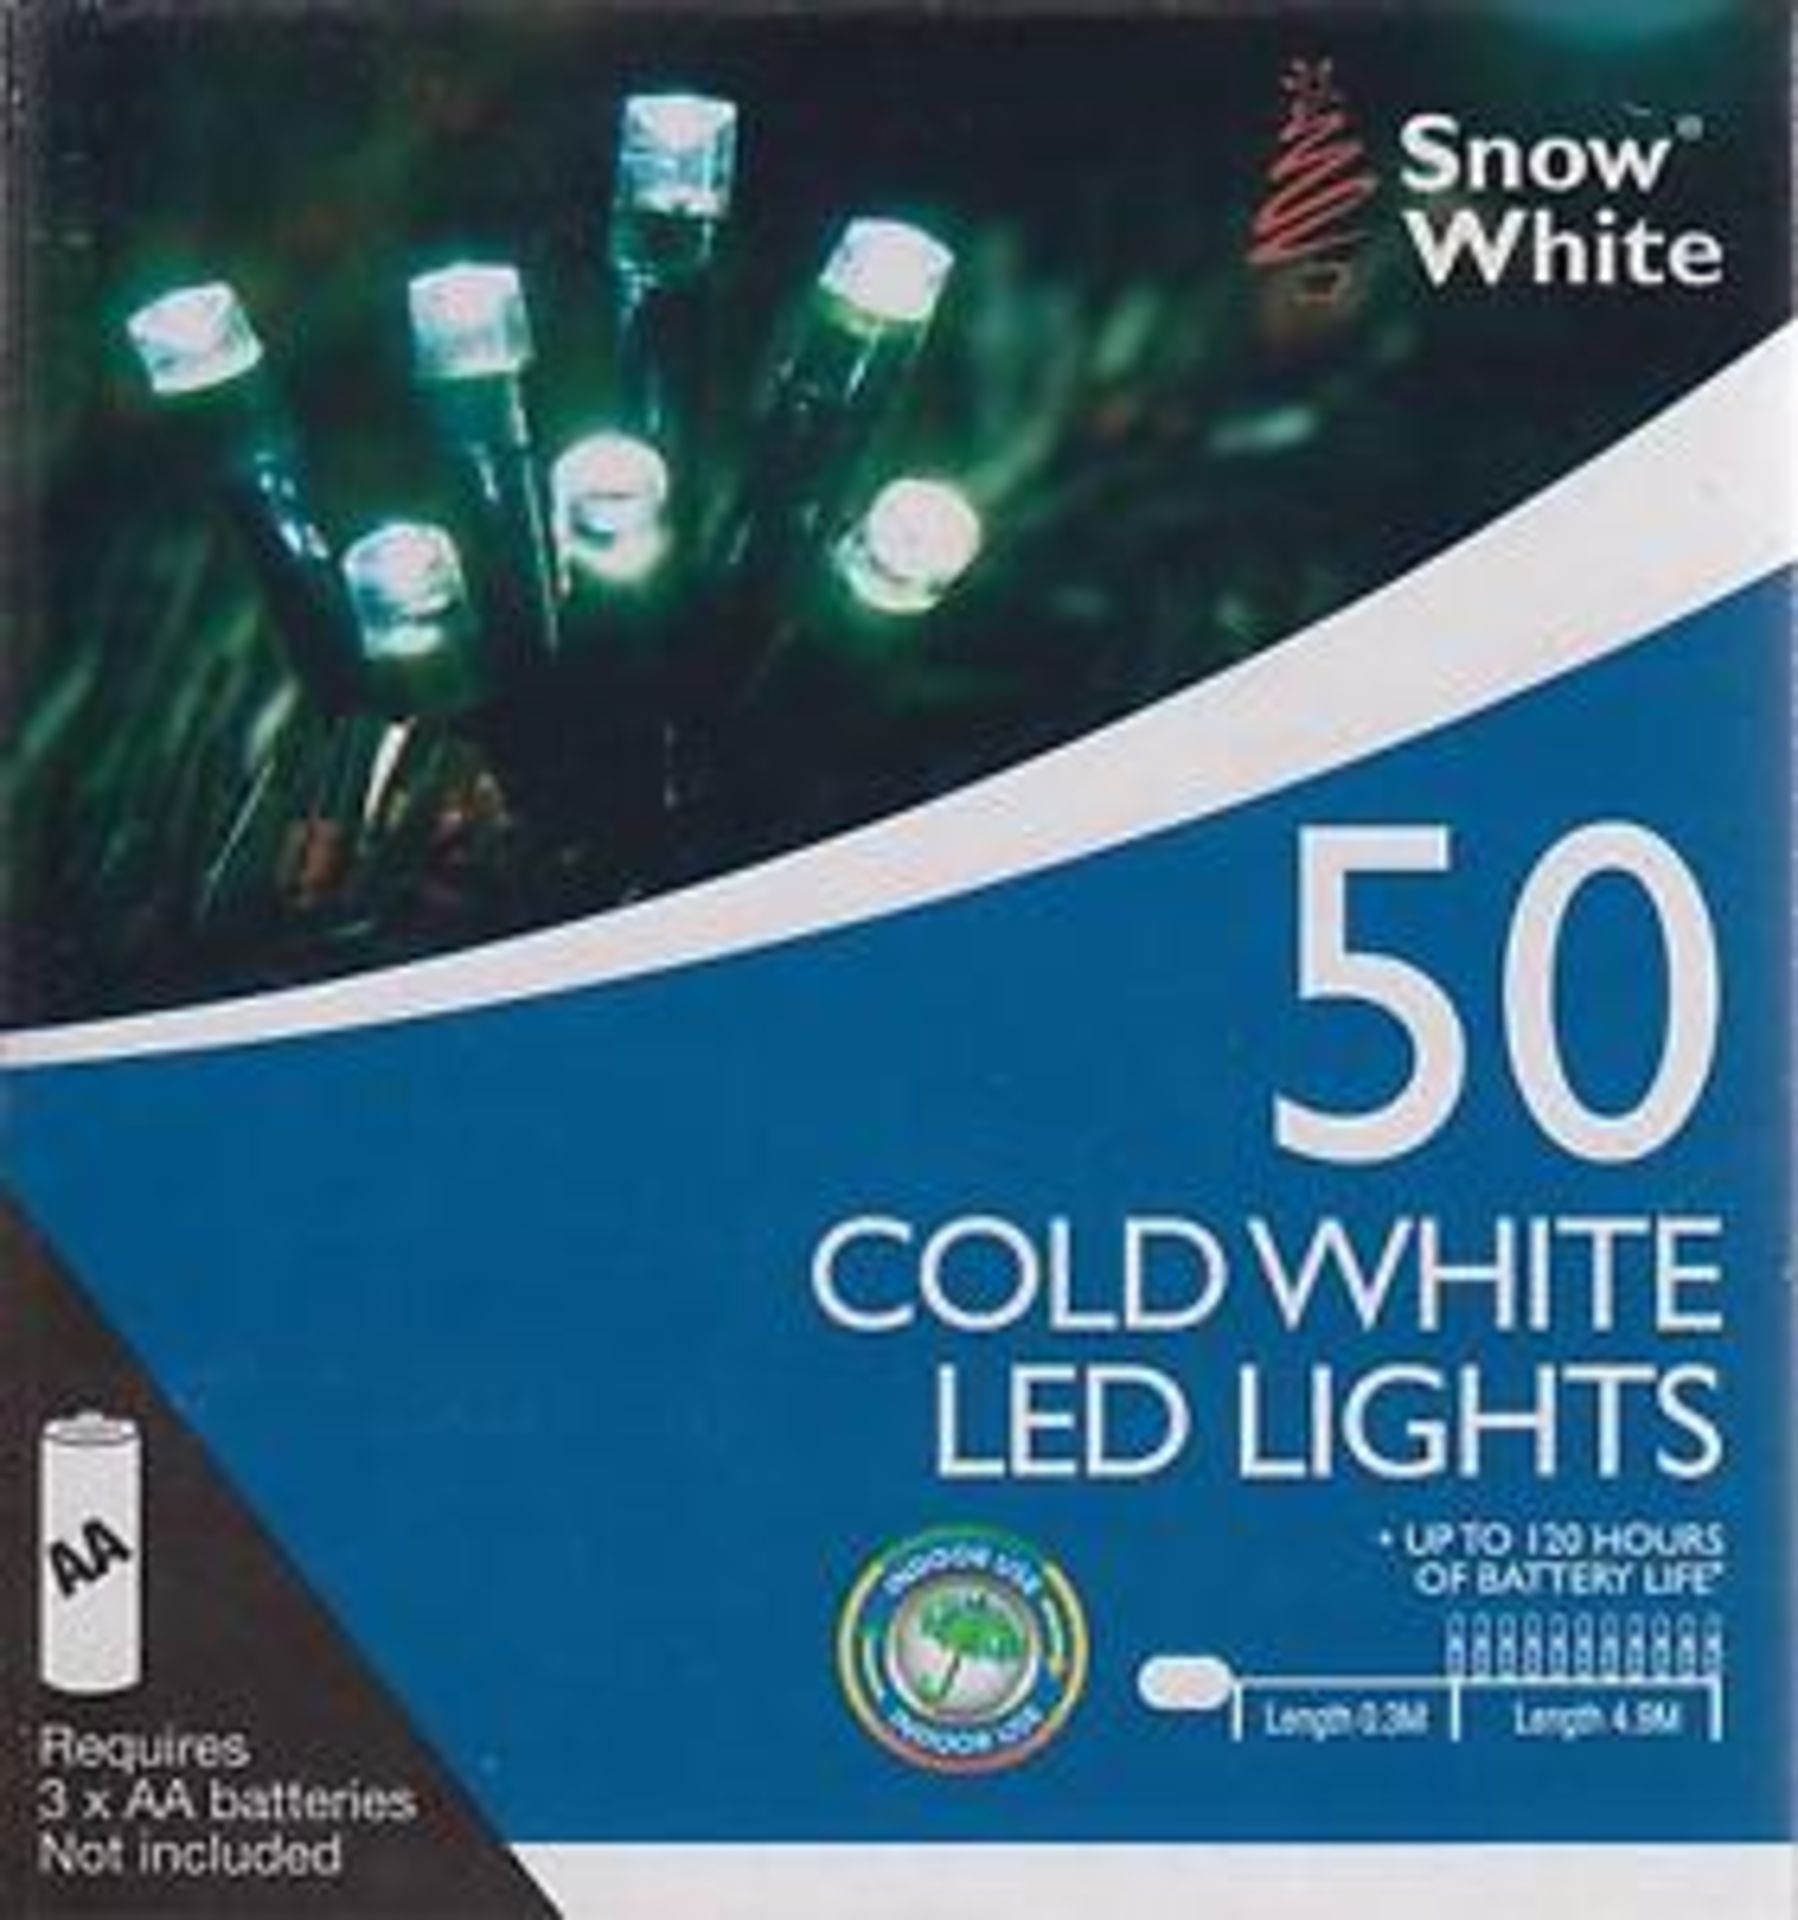 V *TRADE QTY* Brand New Box Of 50 Cold White (Bright) LED Christmas Lights X 3 YOUR BID PRICE TO